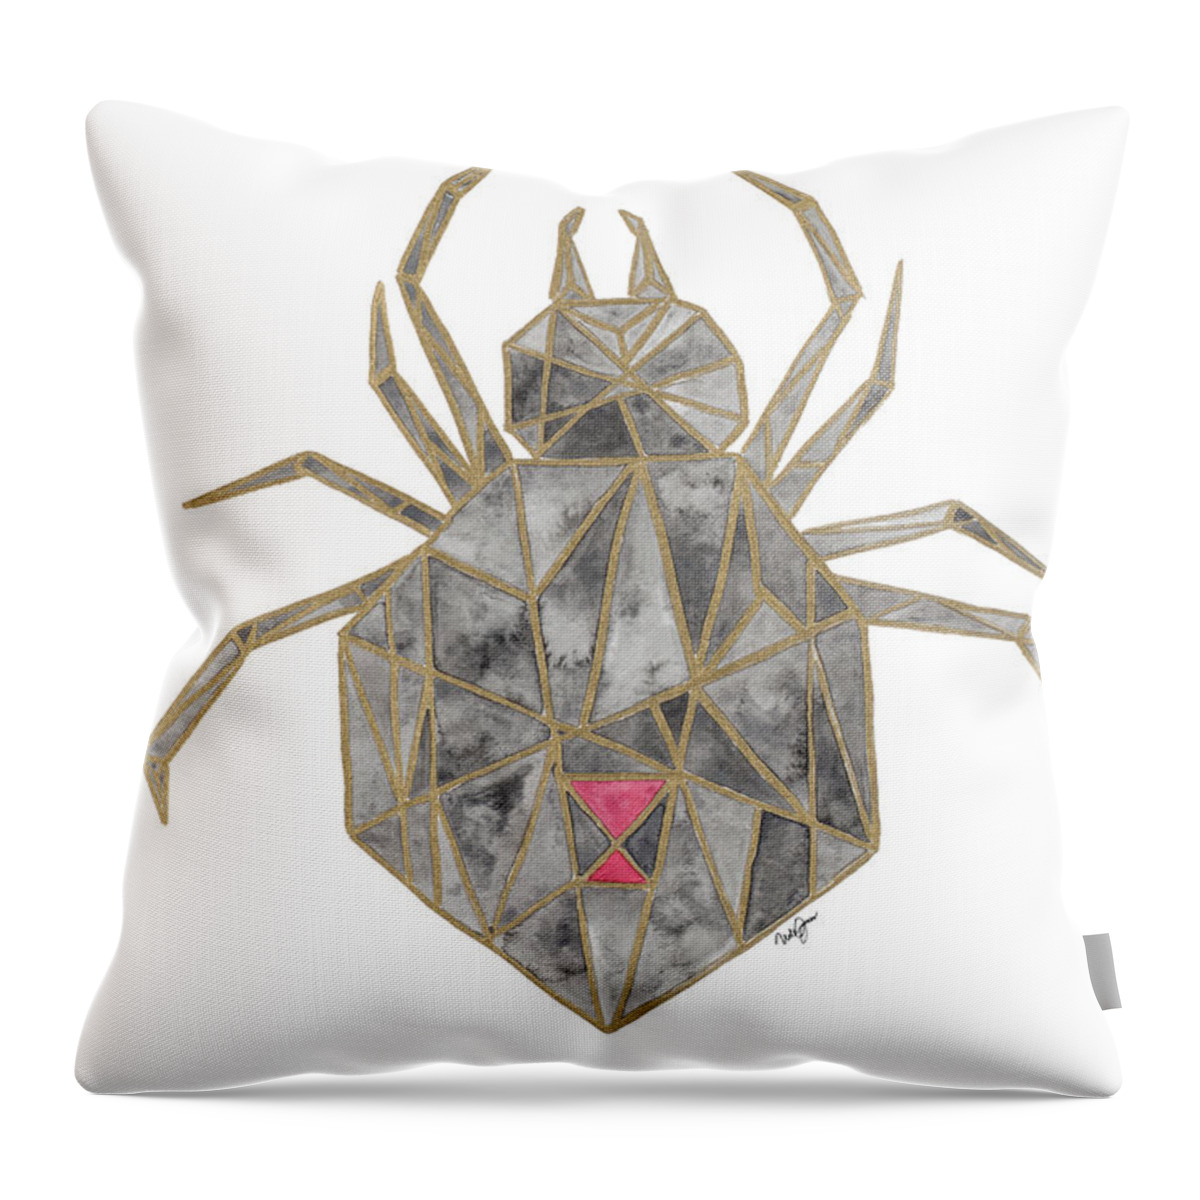 Spider Throw Pillow featuring the mixed media Spider With Gold by Nola James